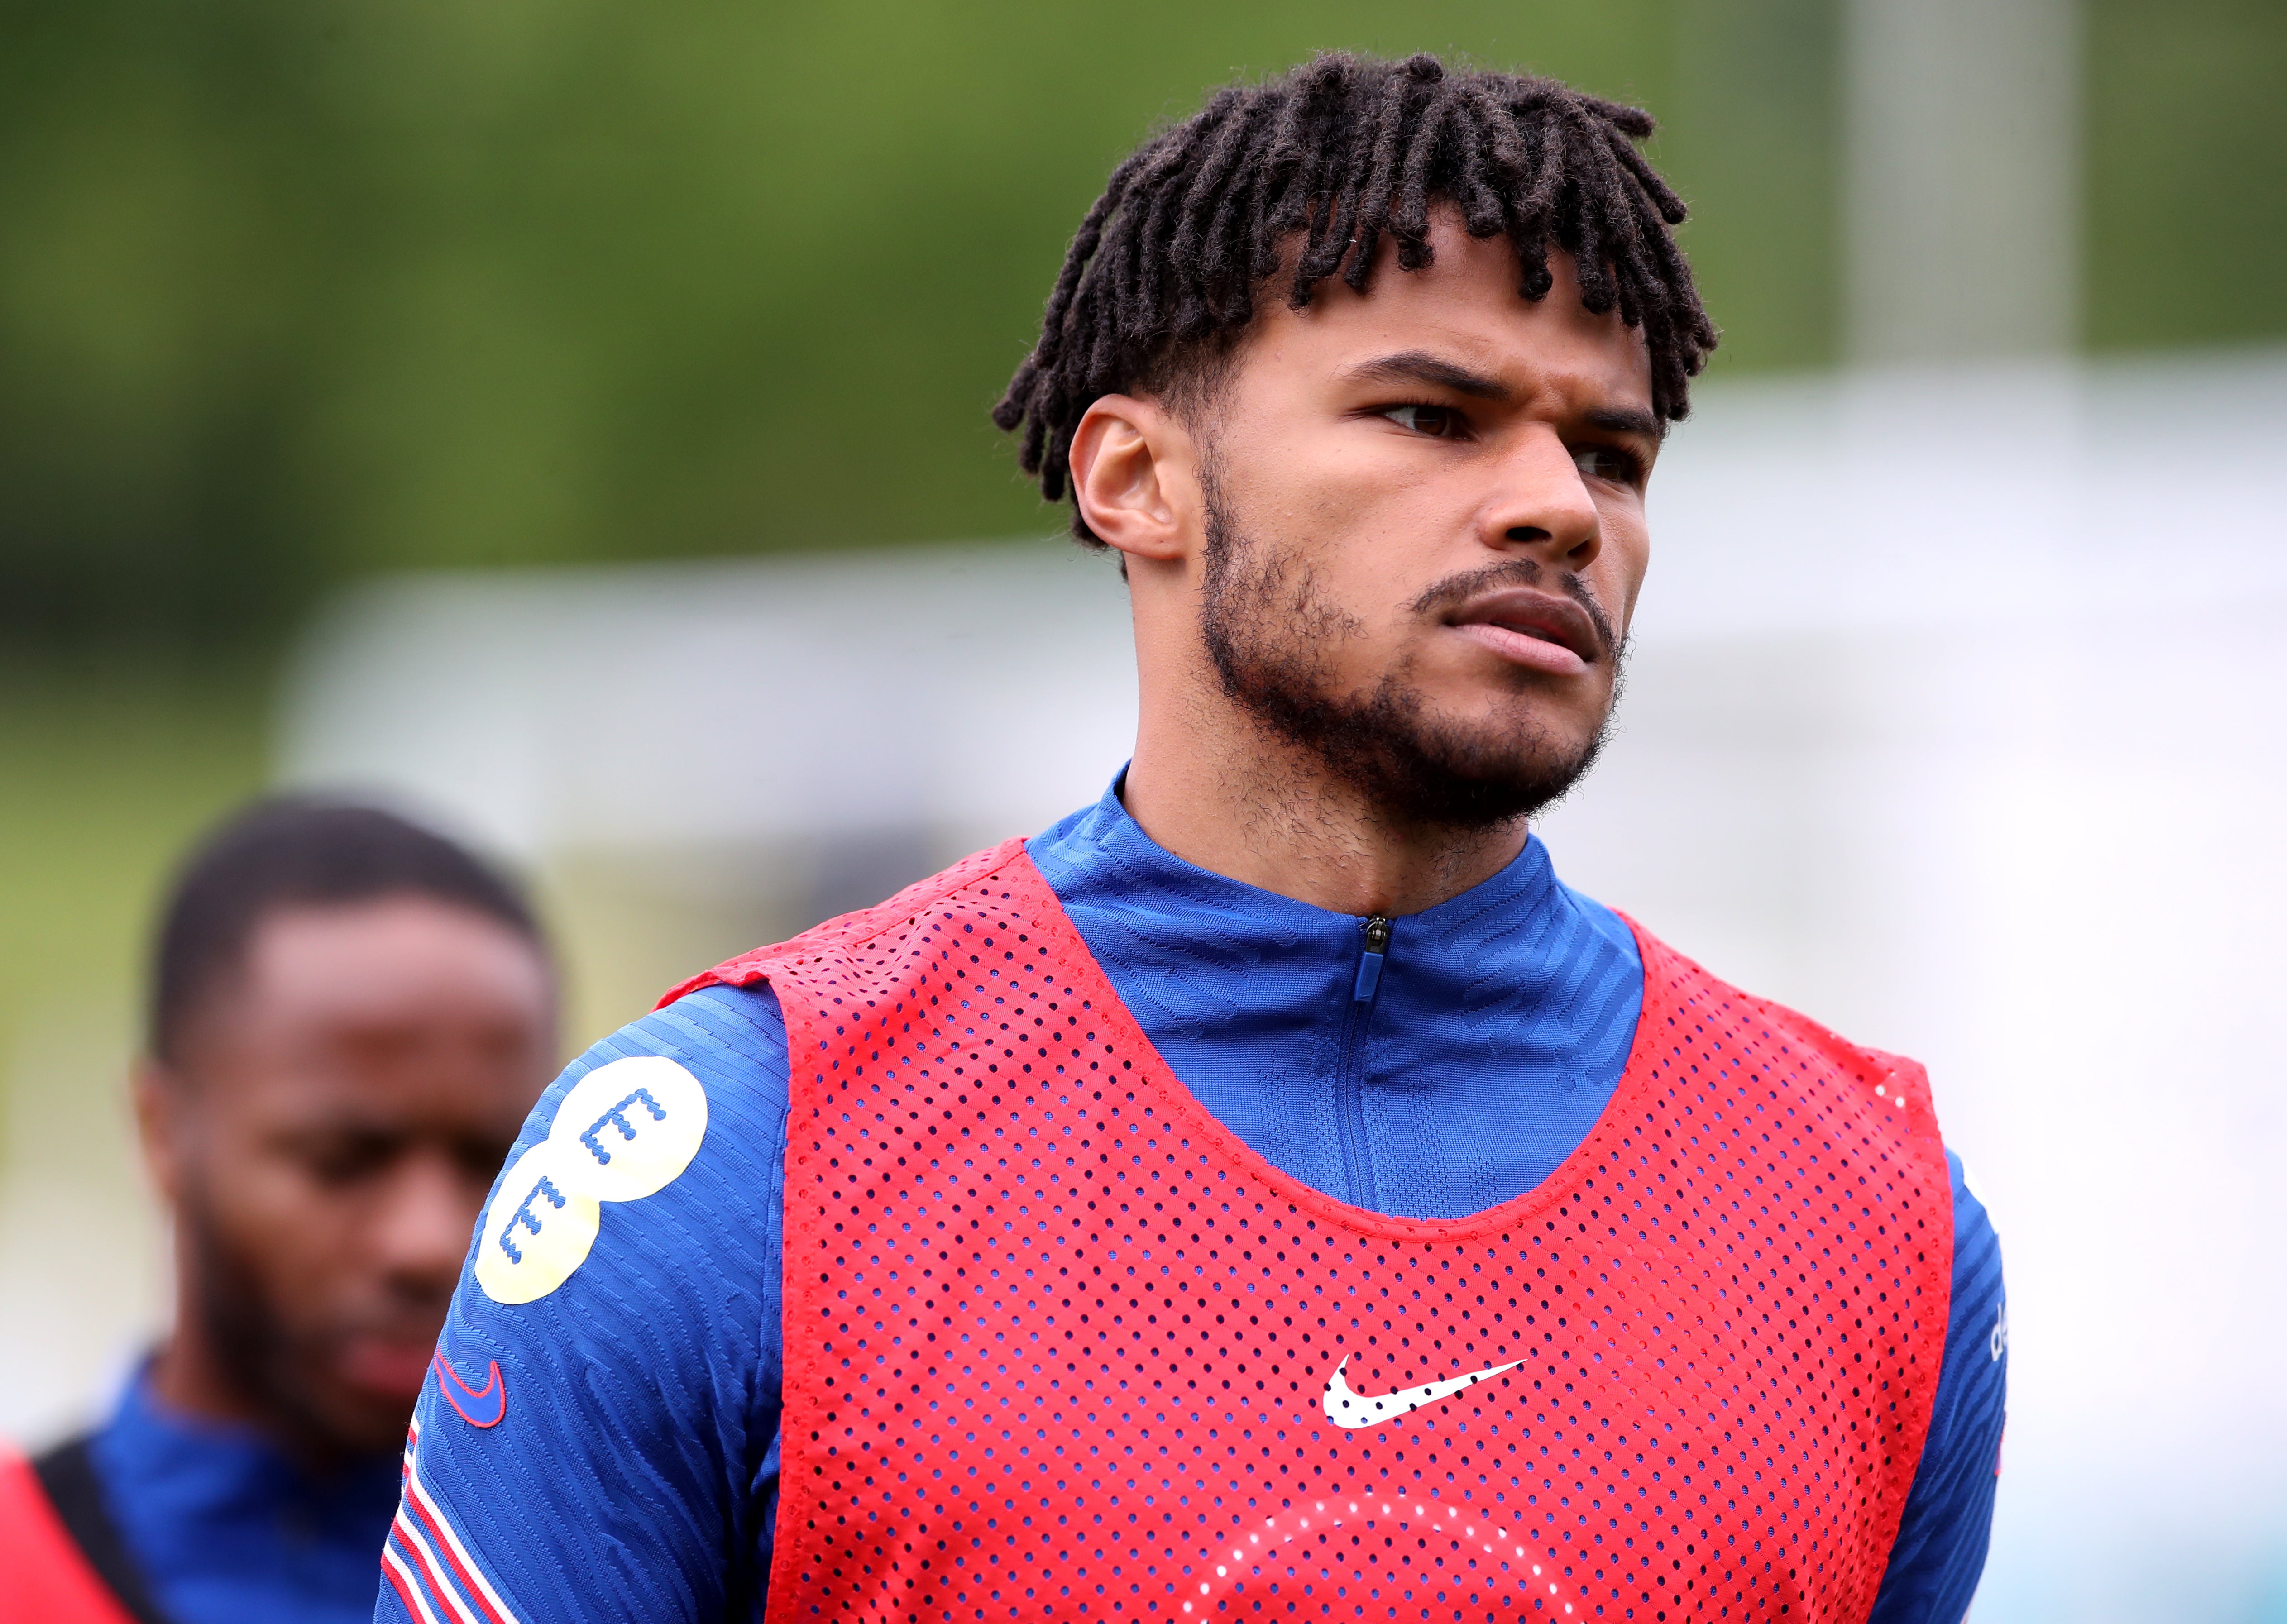 Tyrone Mings said his “mental health did plummet” during the build-up to England’s Euro 2020 opener against Croatia.